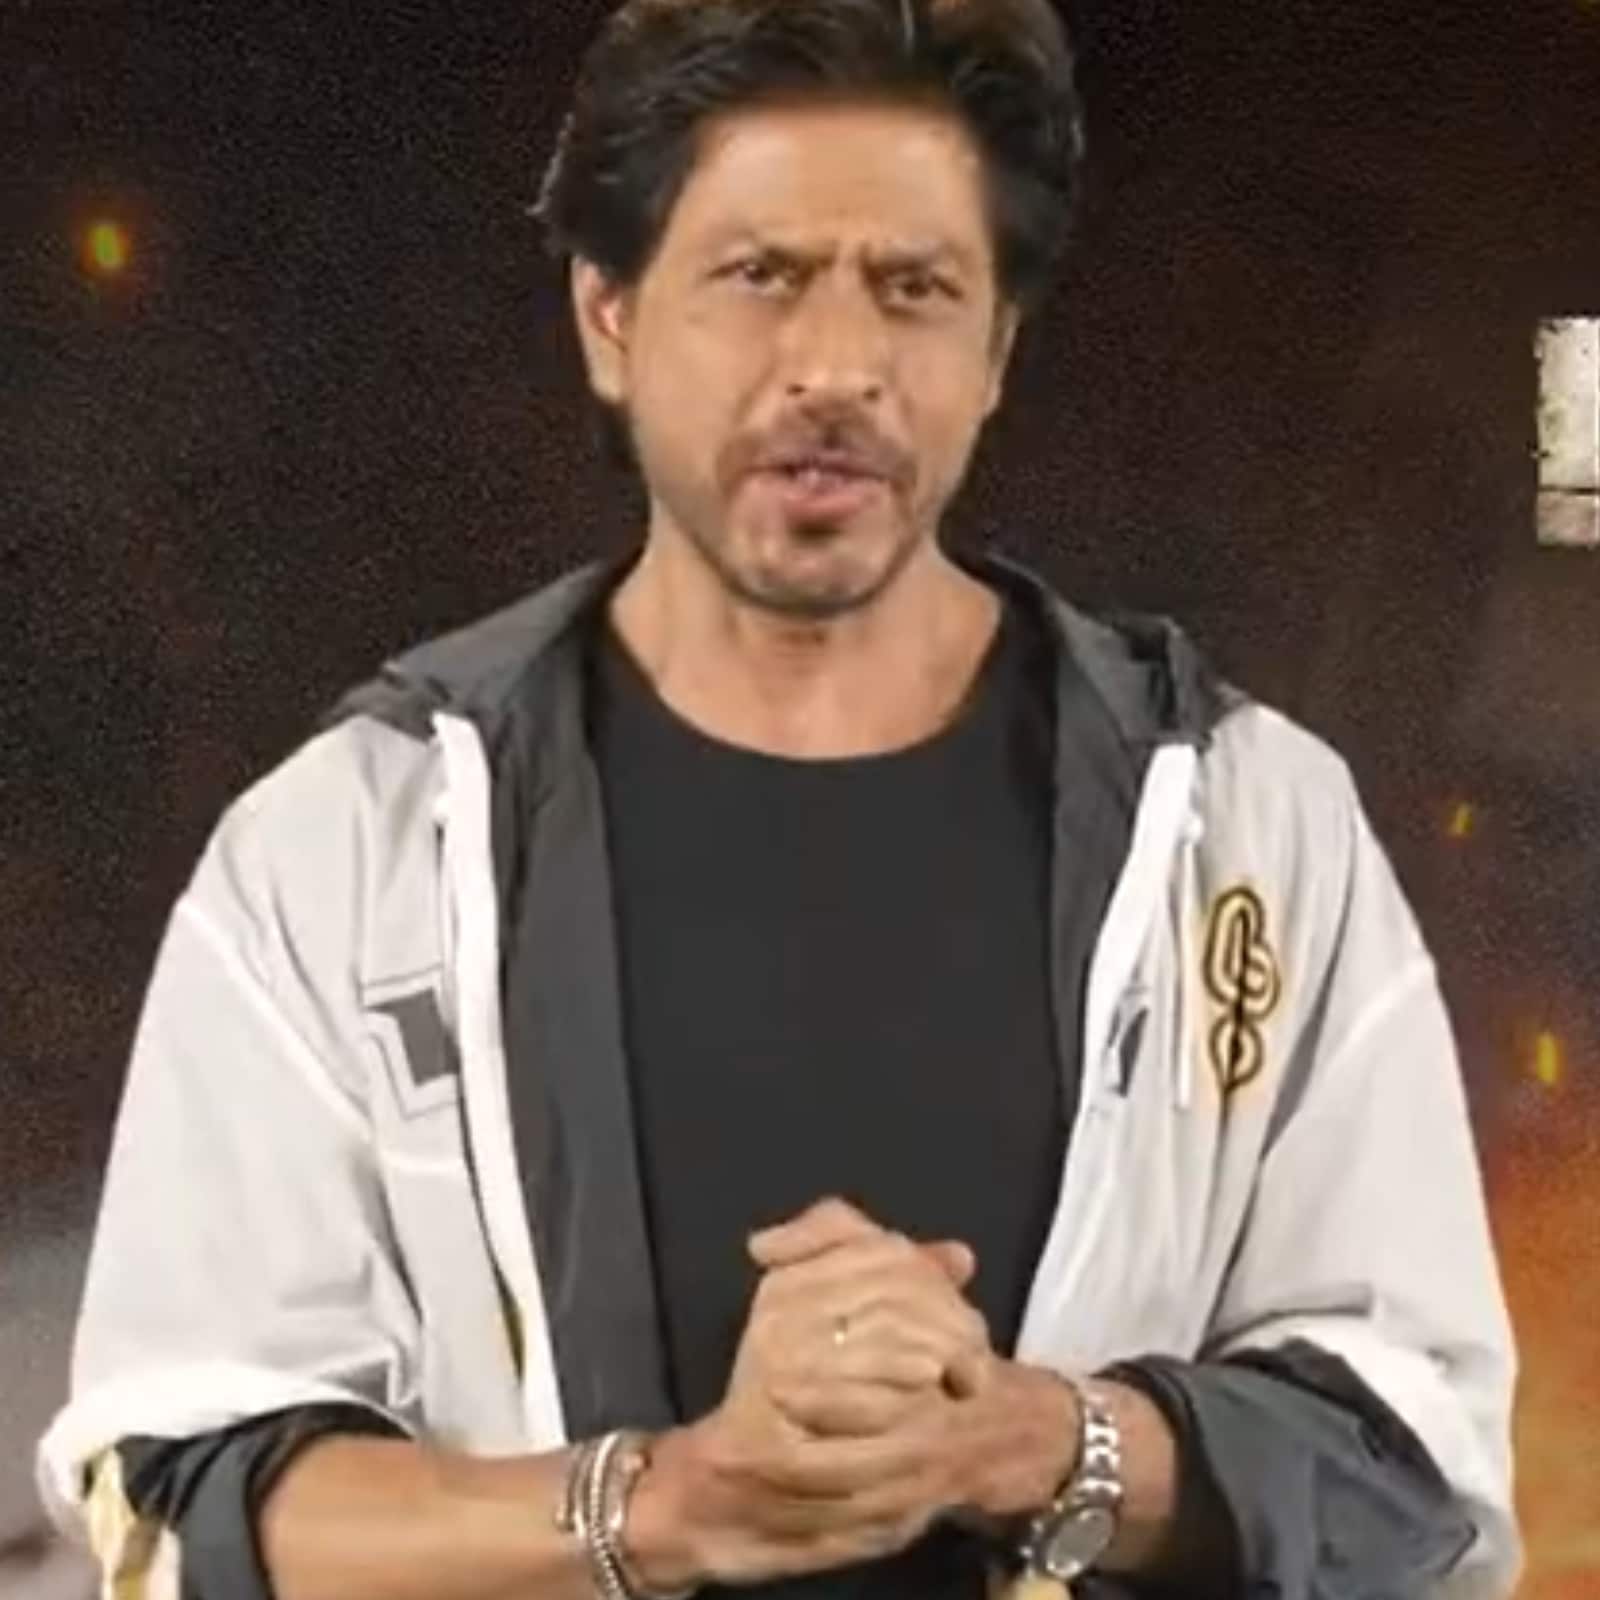 Shah Rukh Khan Warns 'Climate Is Going To Change' As He Confirms